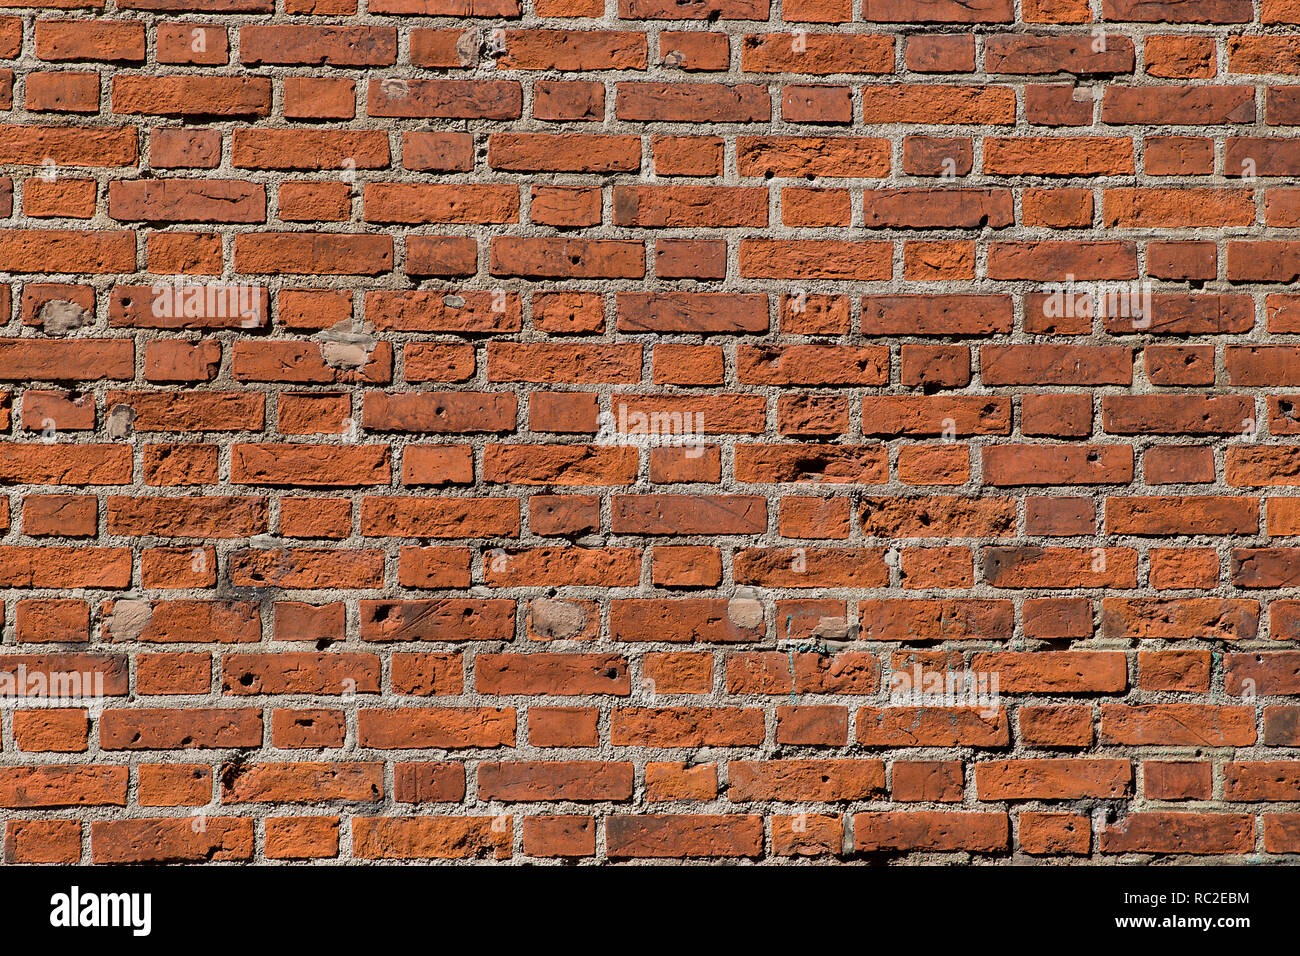 Ancient red brick wall with bullet holes. Stock Photo